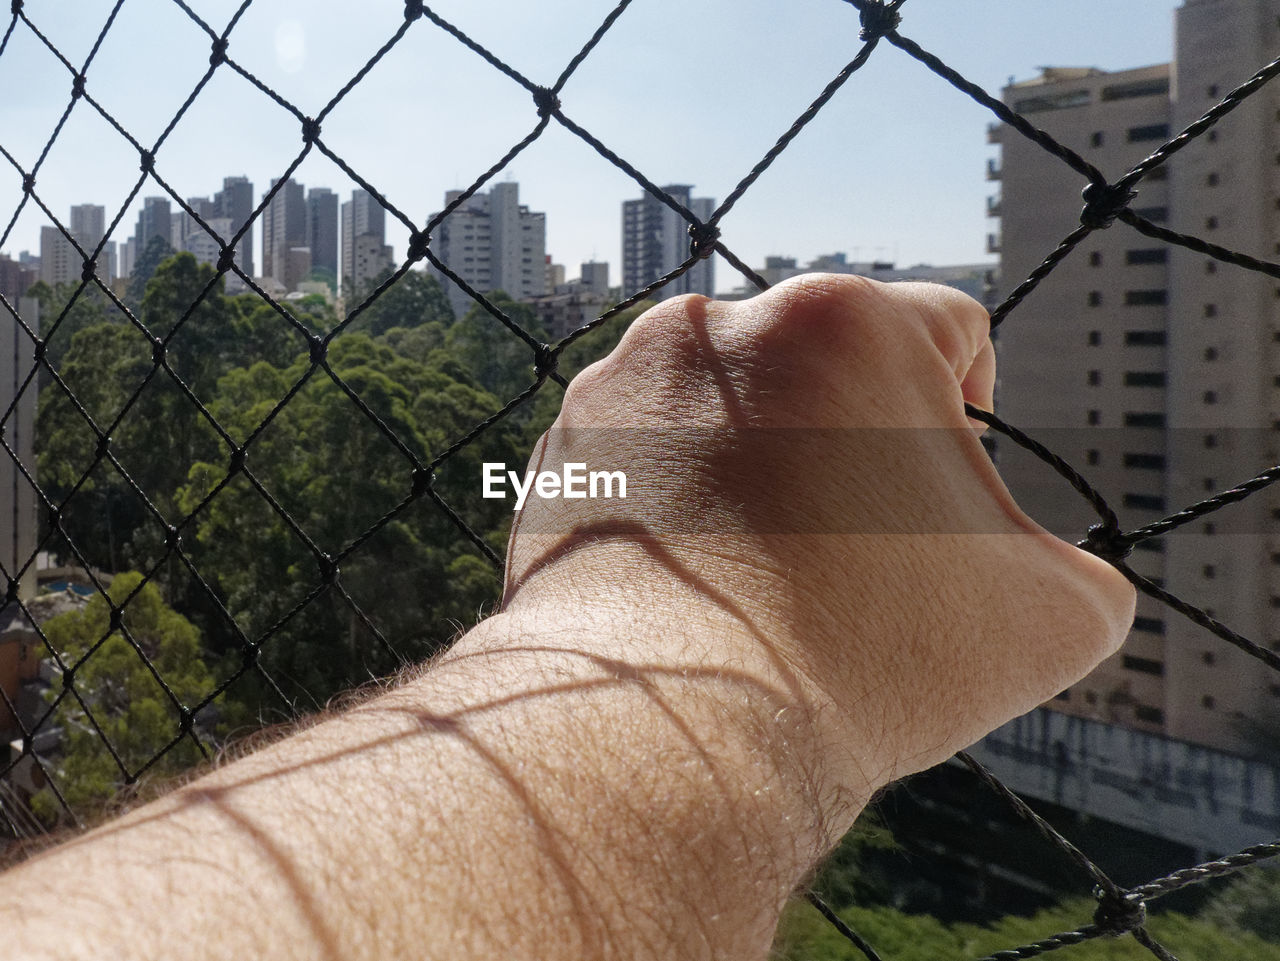 MIDSECTION OF MAN WITH CHAINLINK FENCE AGAINST CITYSCAPE SEEN THROUGH METAL